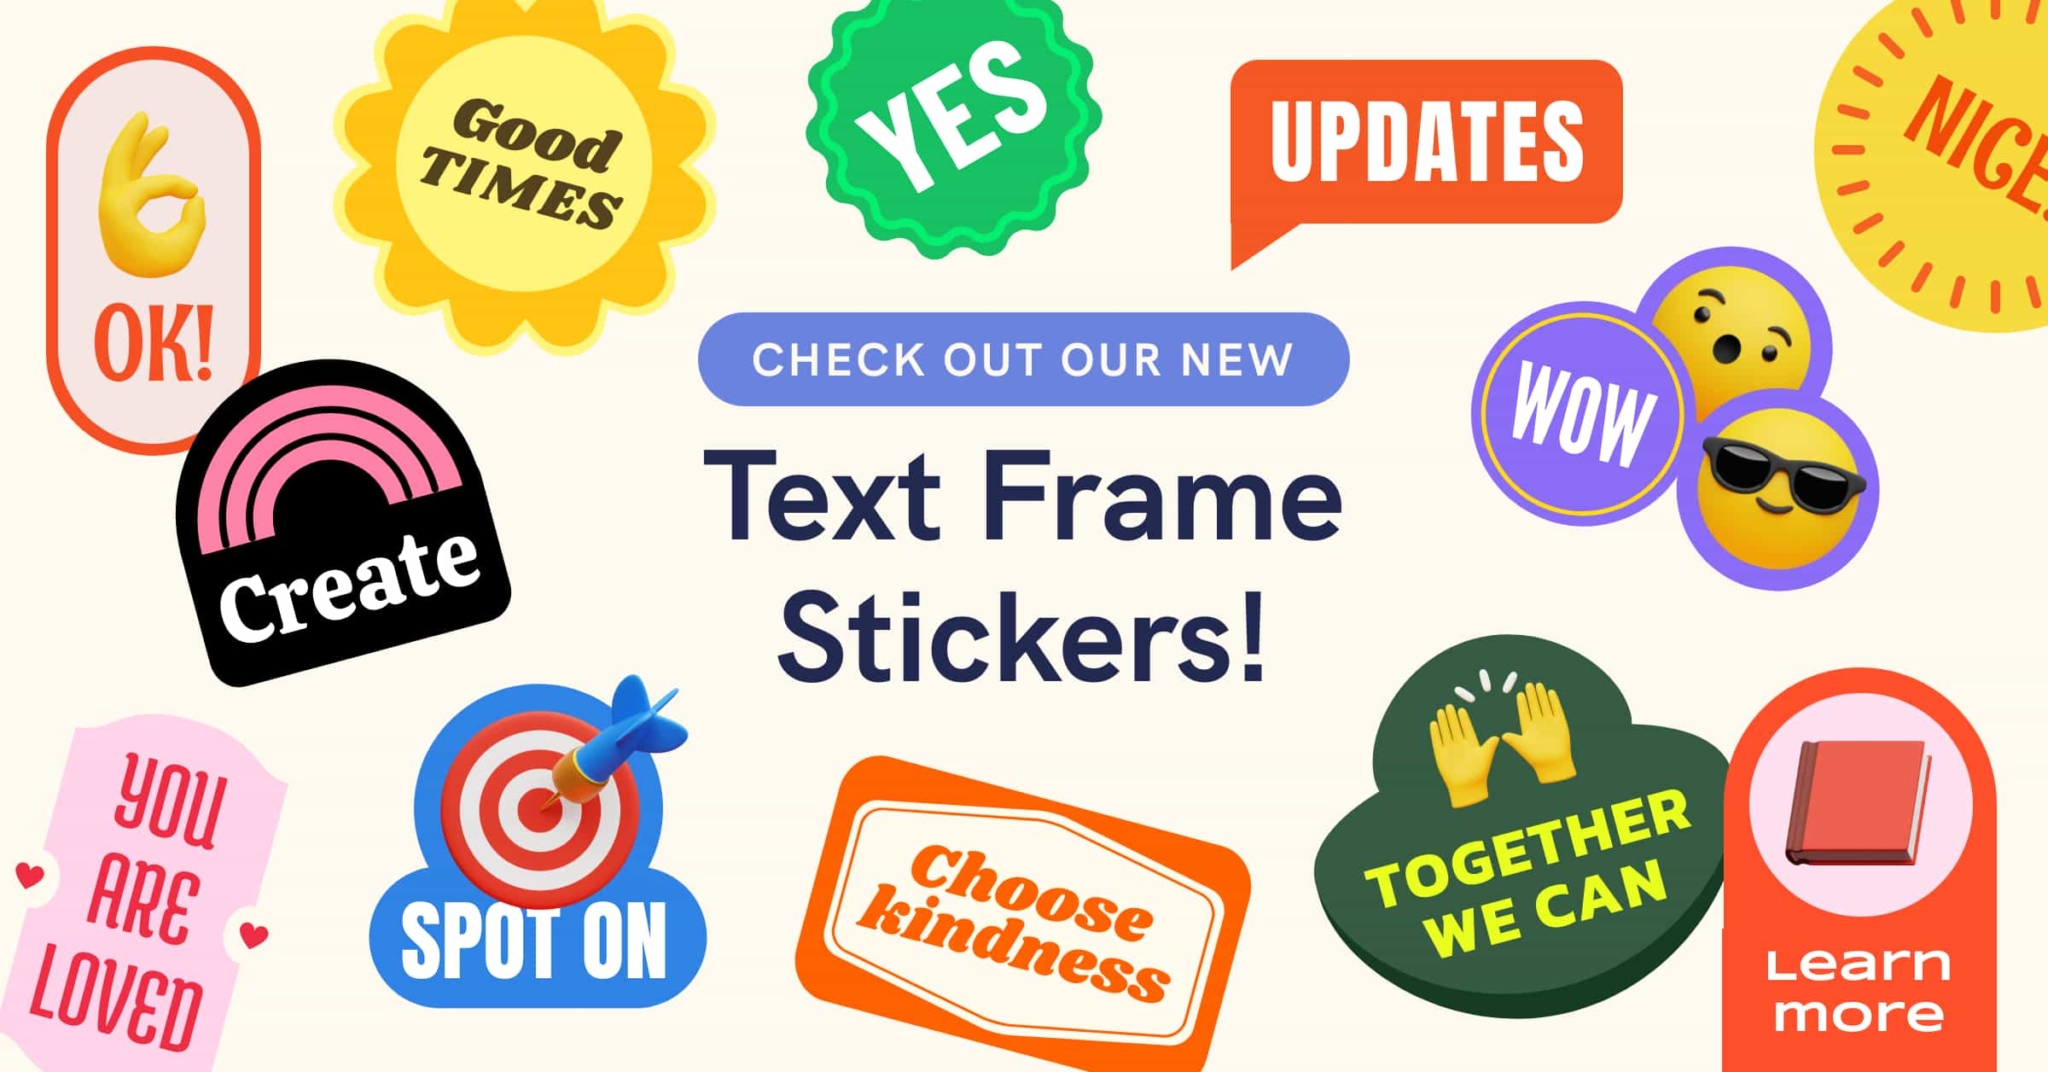 new text frame stickers by Piktochart 